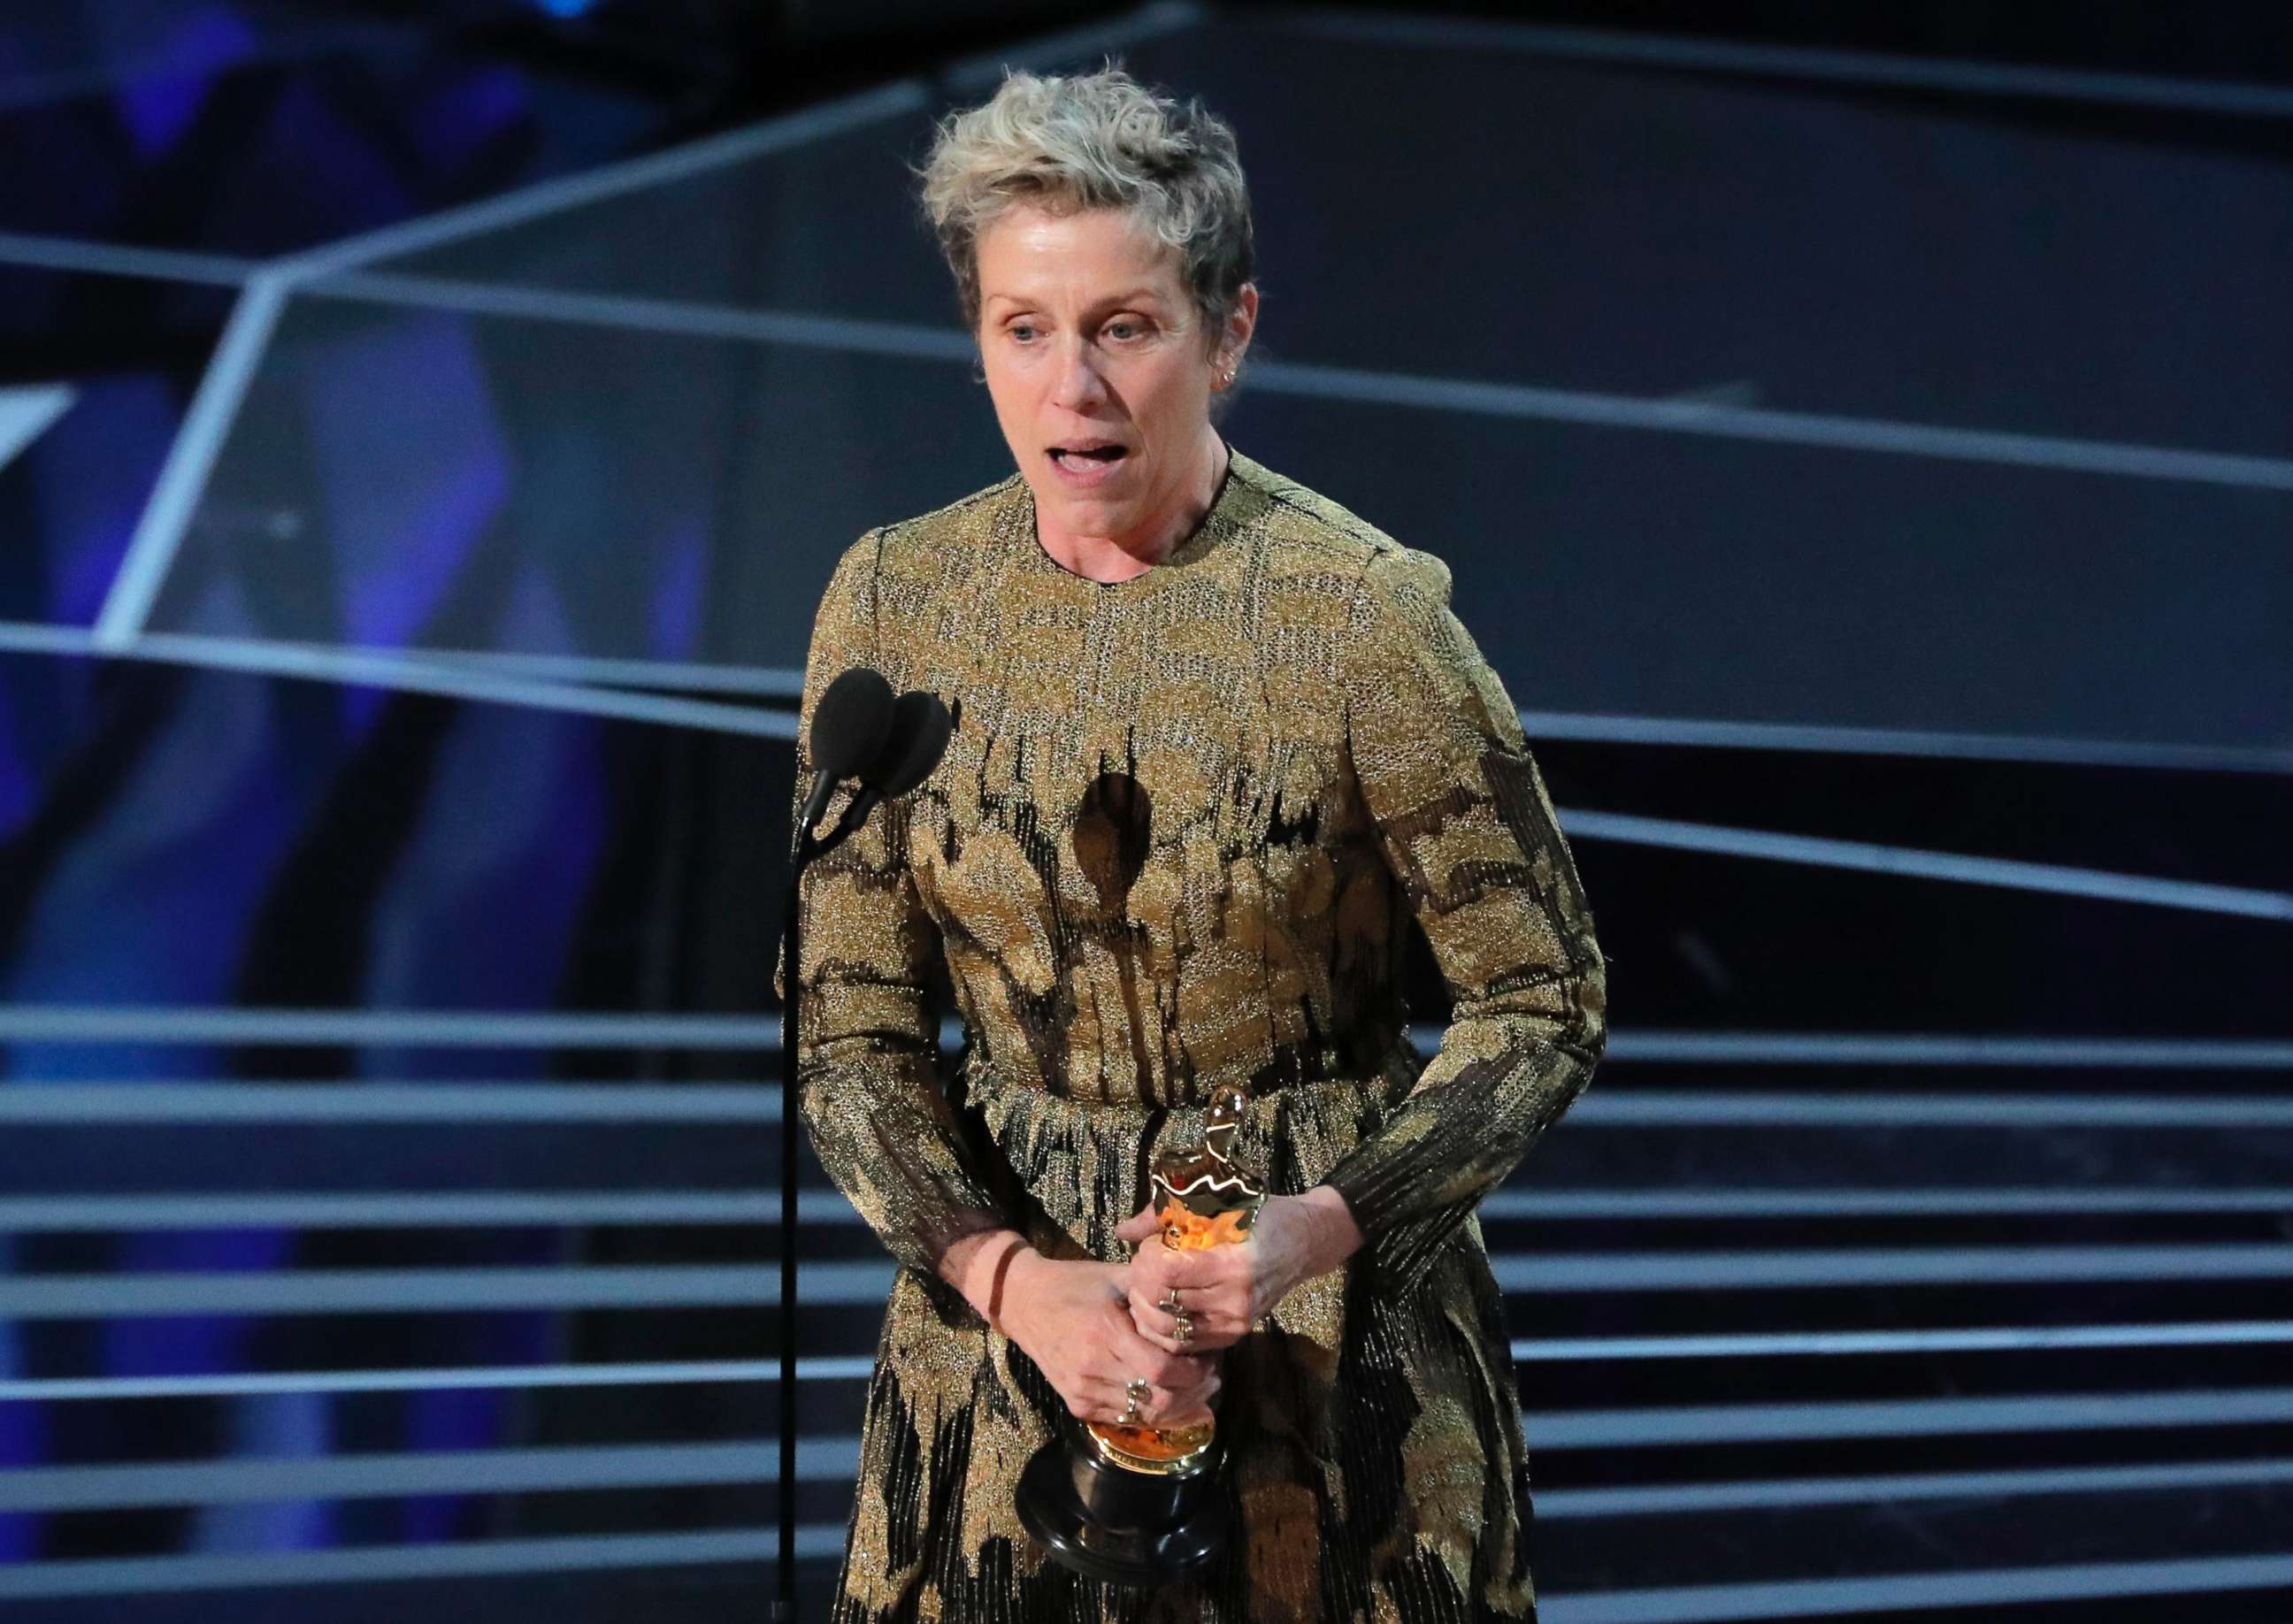 PHOTO: Frances McDormand accepts the Oscar for Best Actress for "Three Billboards Outside Ebbing, Missouri," March 4, 2018.